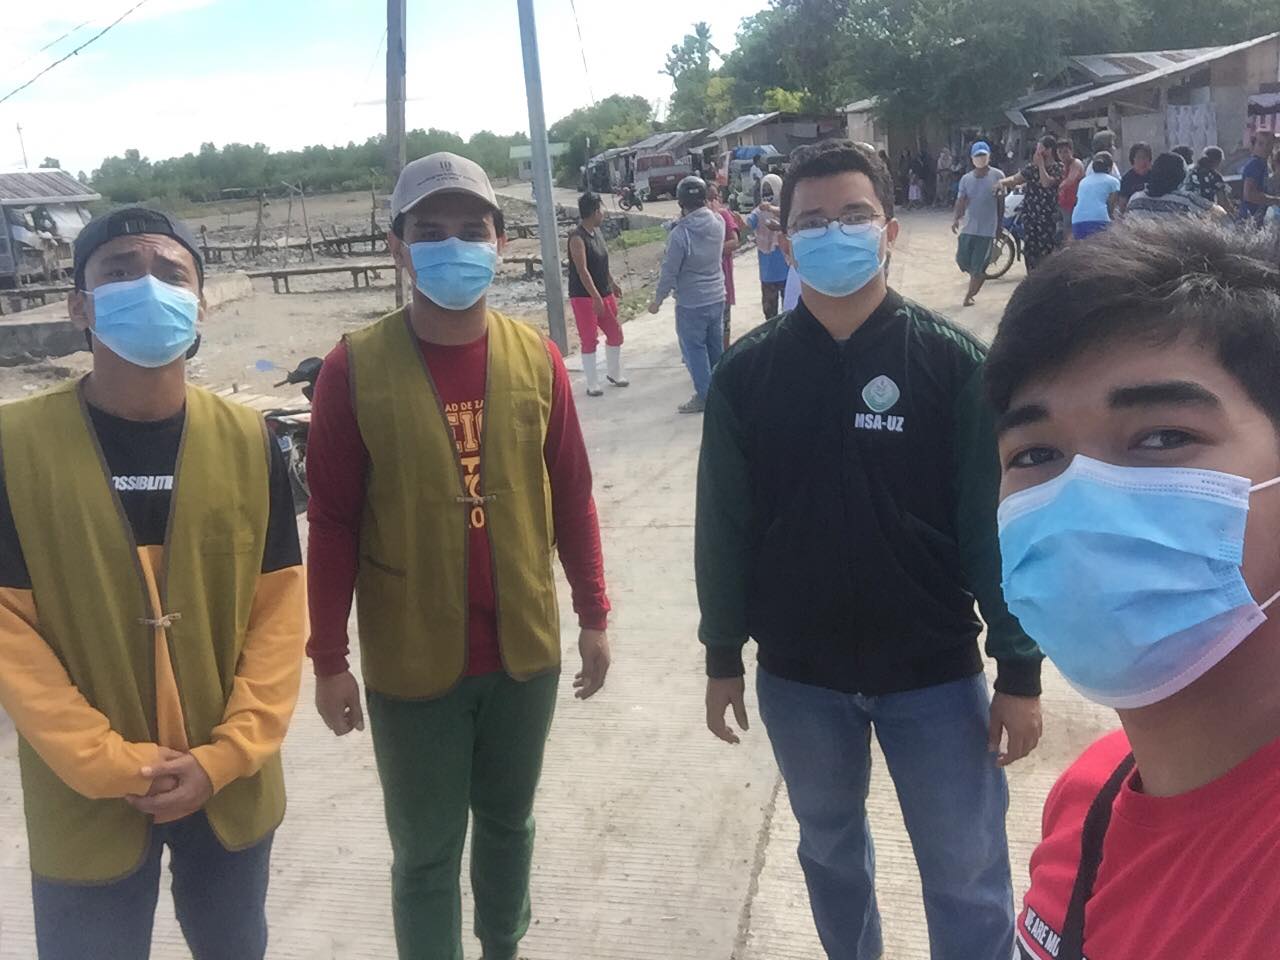 Munadzrin Ipah (2nd from right) and Karwin Hamjani (2nd from left) with other student volunteers during a relief distribution in Zamboanga. 【Photo by Tzu Chi Zamboanga】